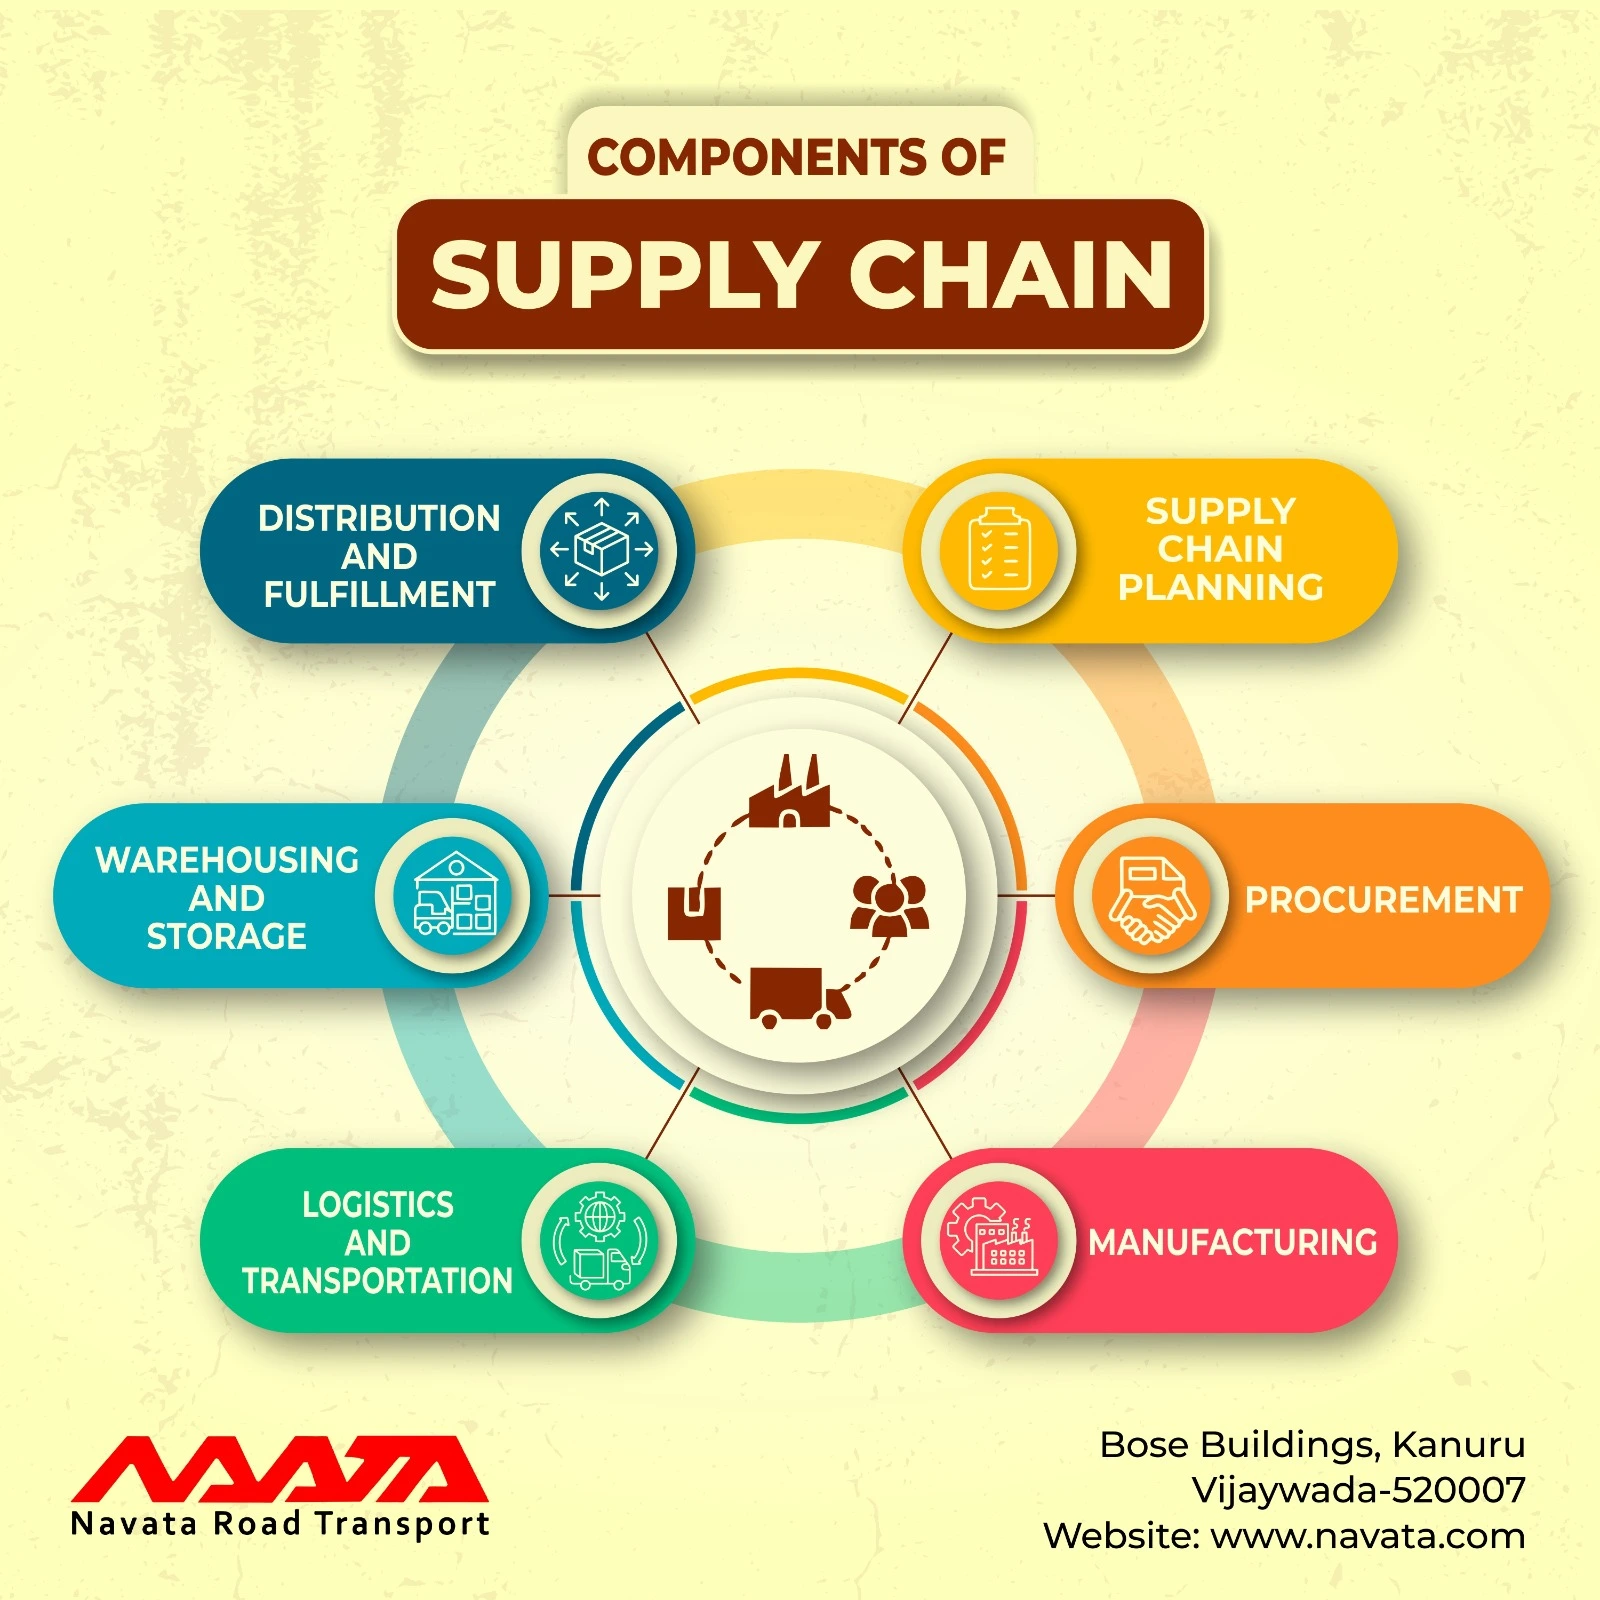 Components of Supply Chain